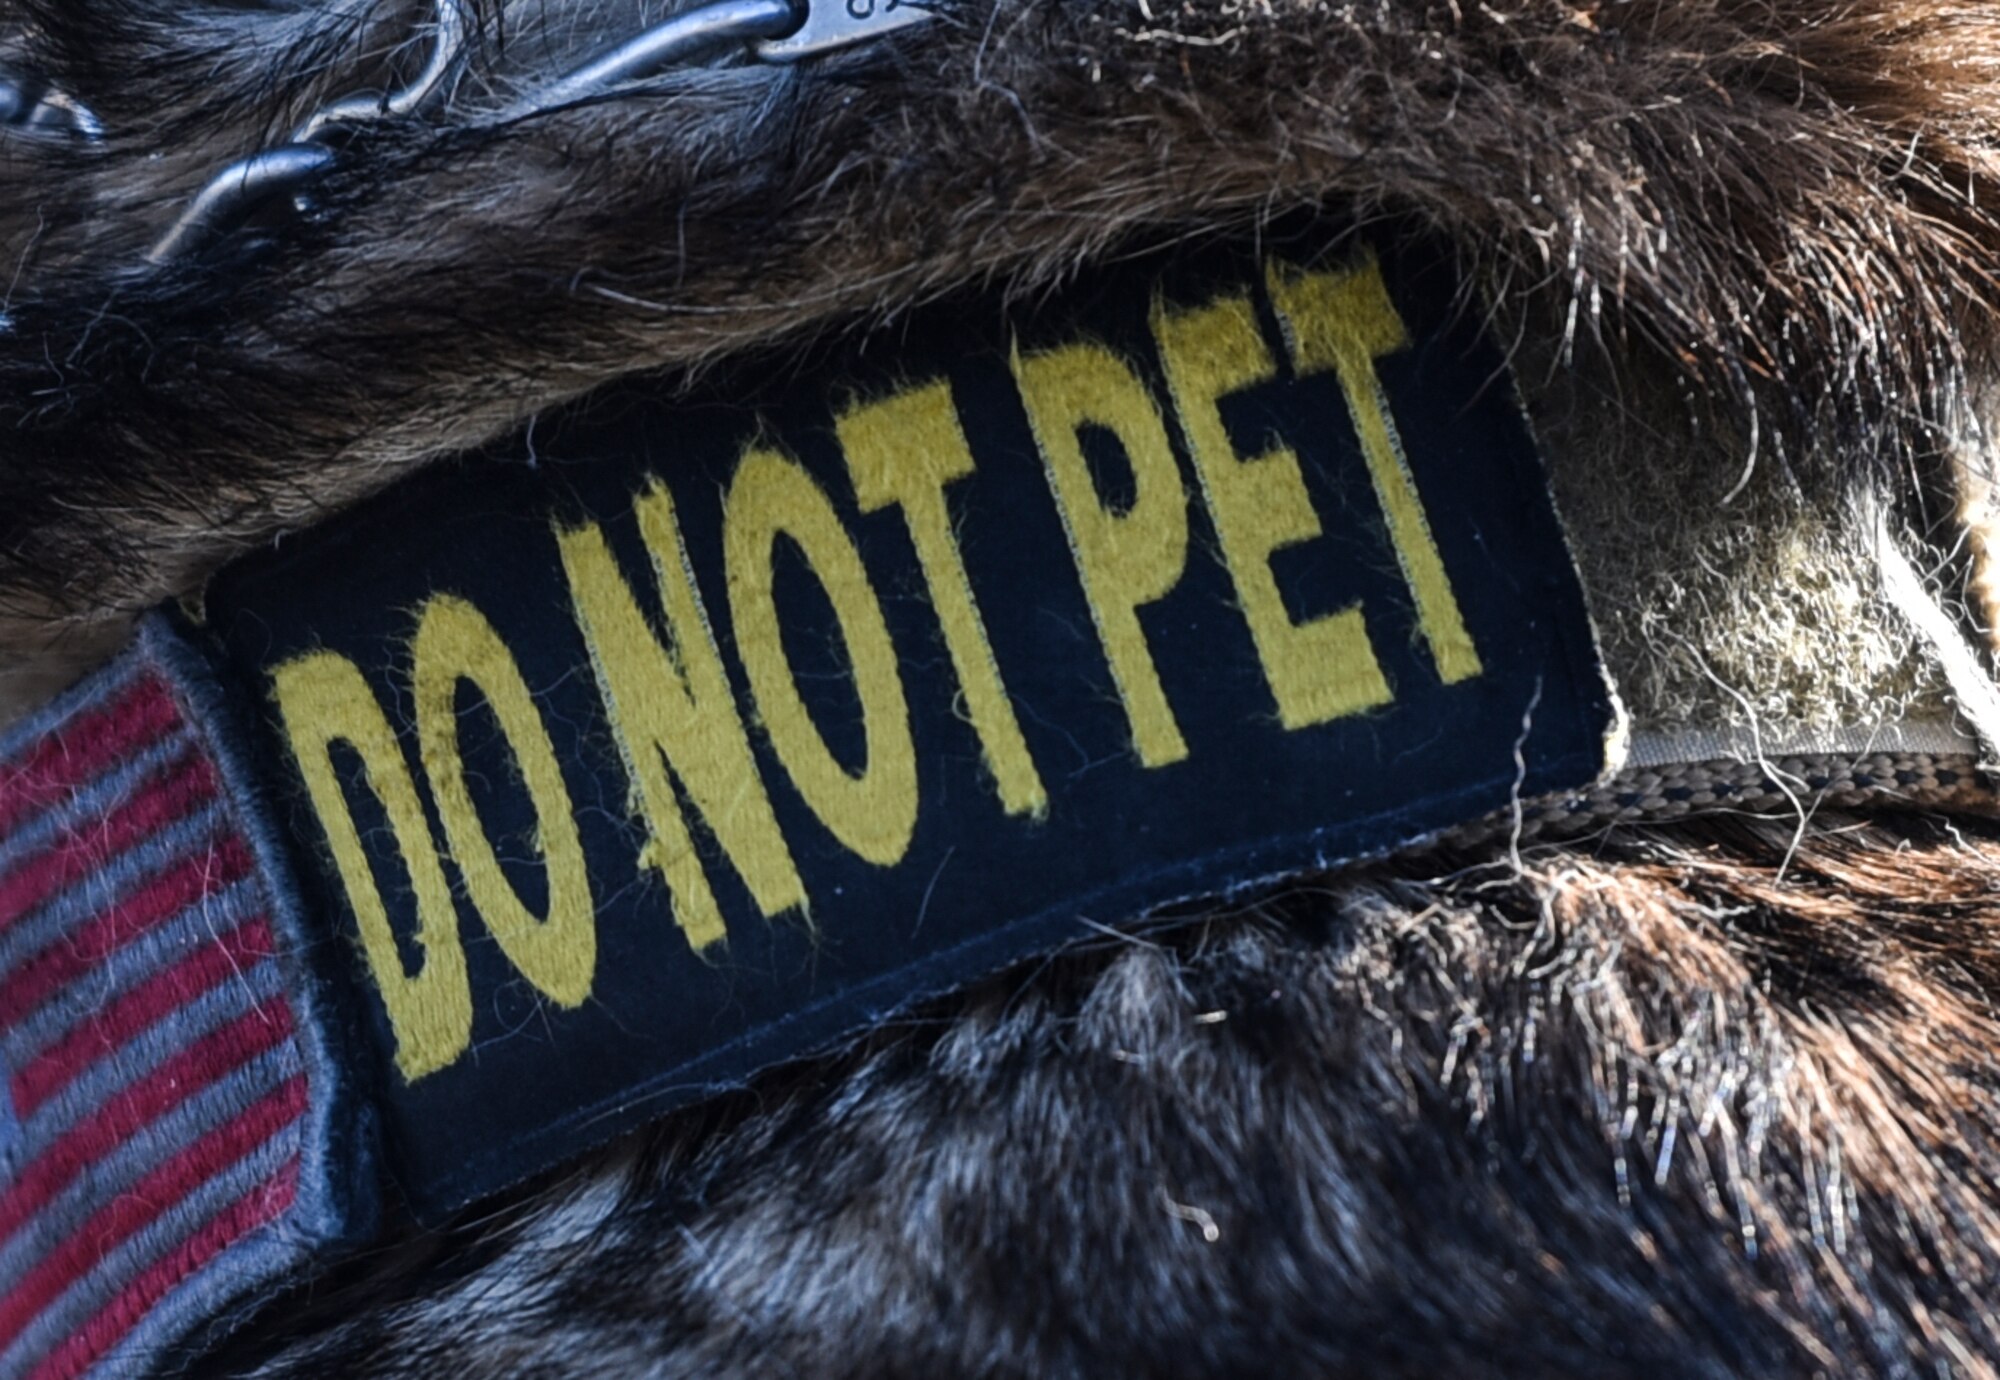 The collar of a Military Working Dog, from the 92nd Security Forces Squadron, warns people to not pet it Nov. 21, 2019, at Fairchild Air Force Base, Washington.